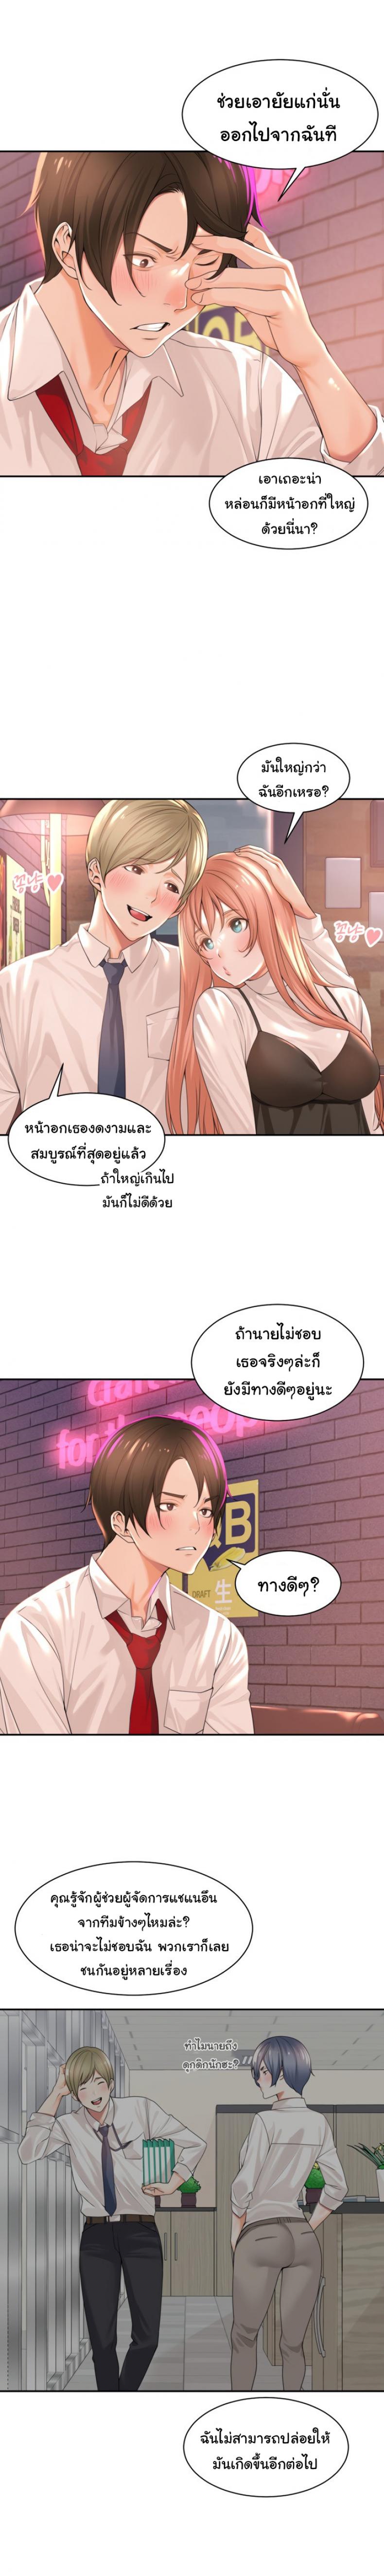 Manager, Please Scold Me 1 ภาพที่ 15